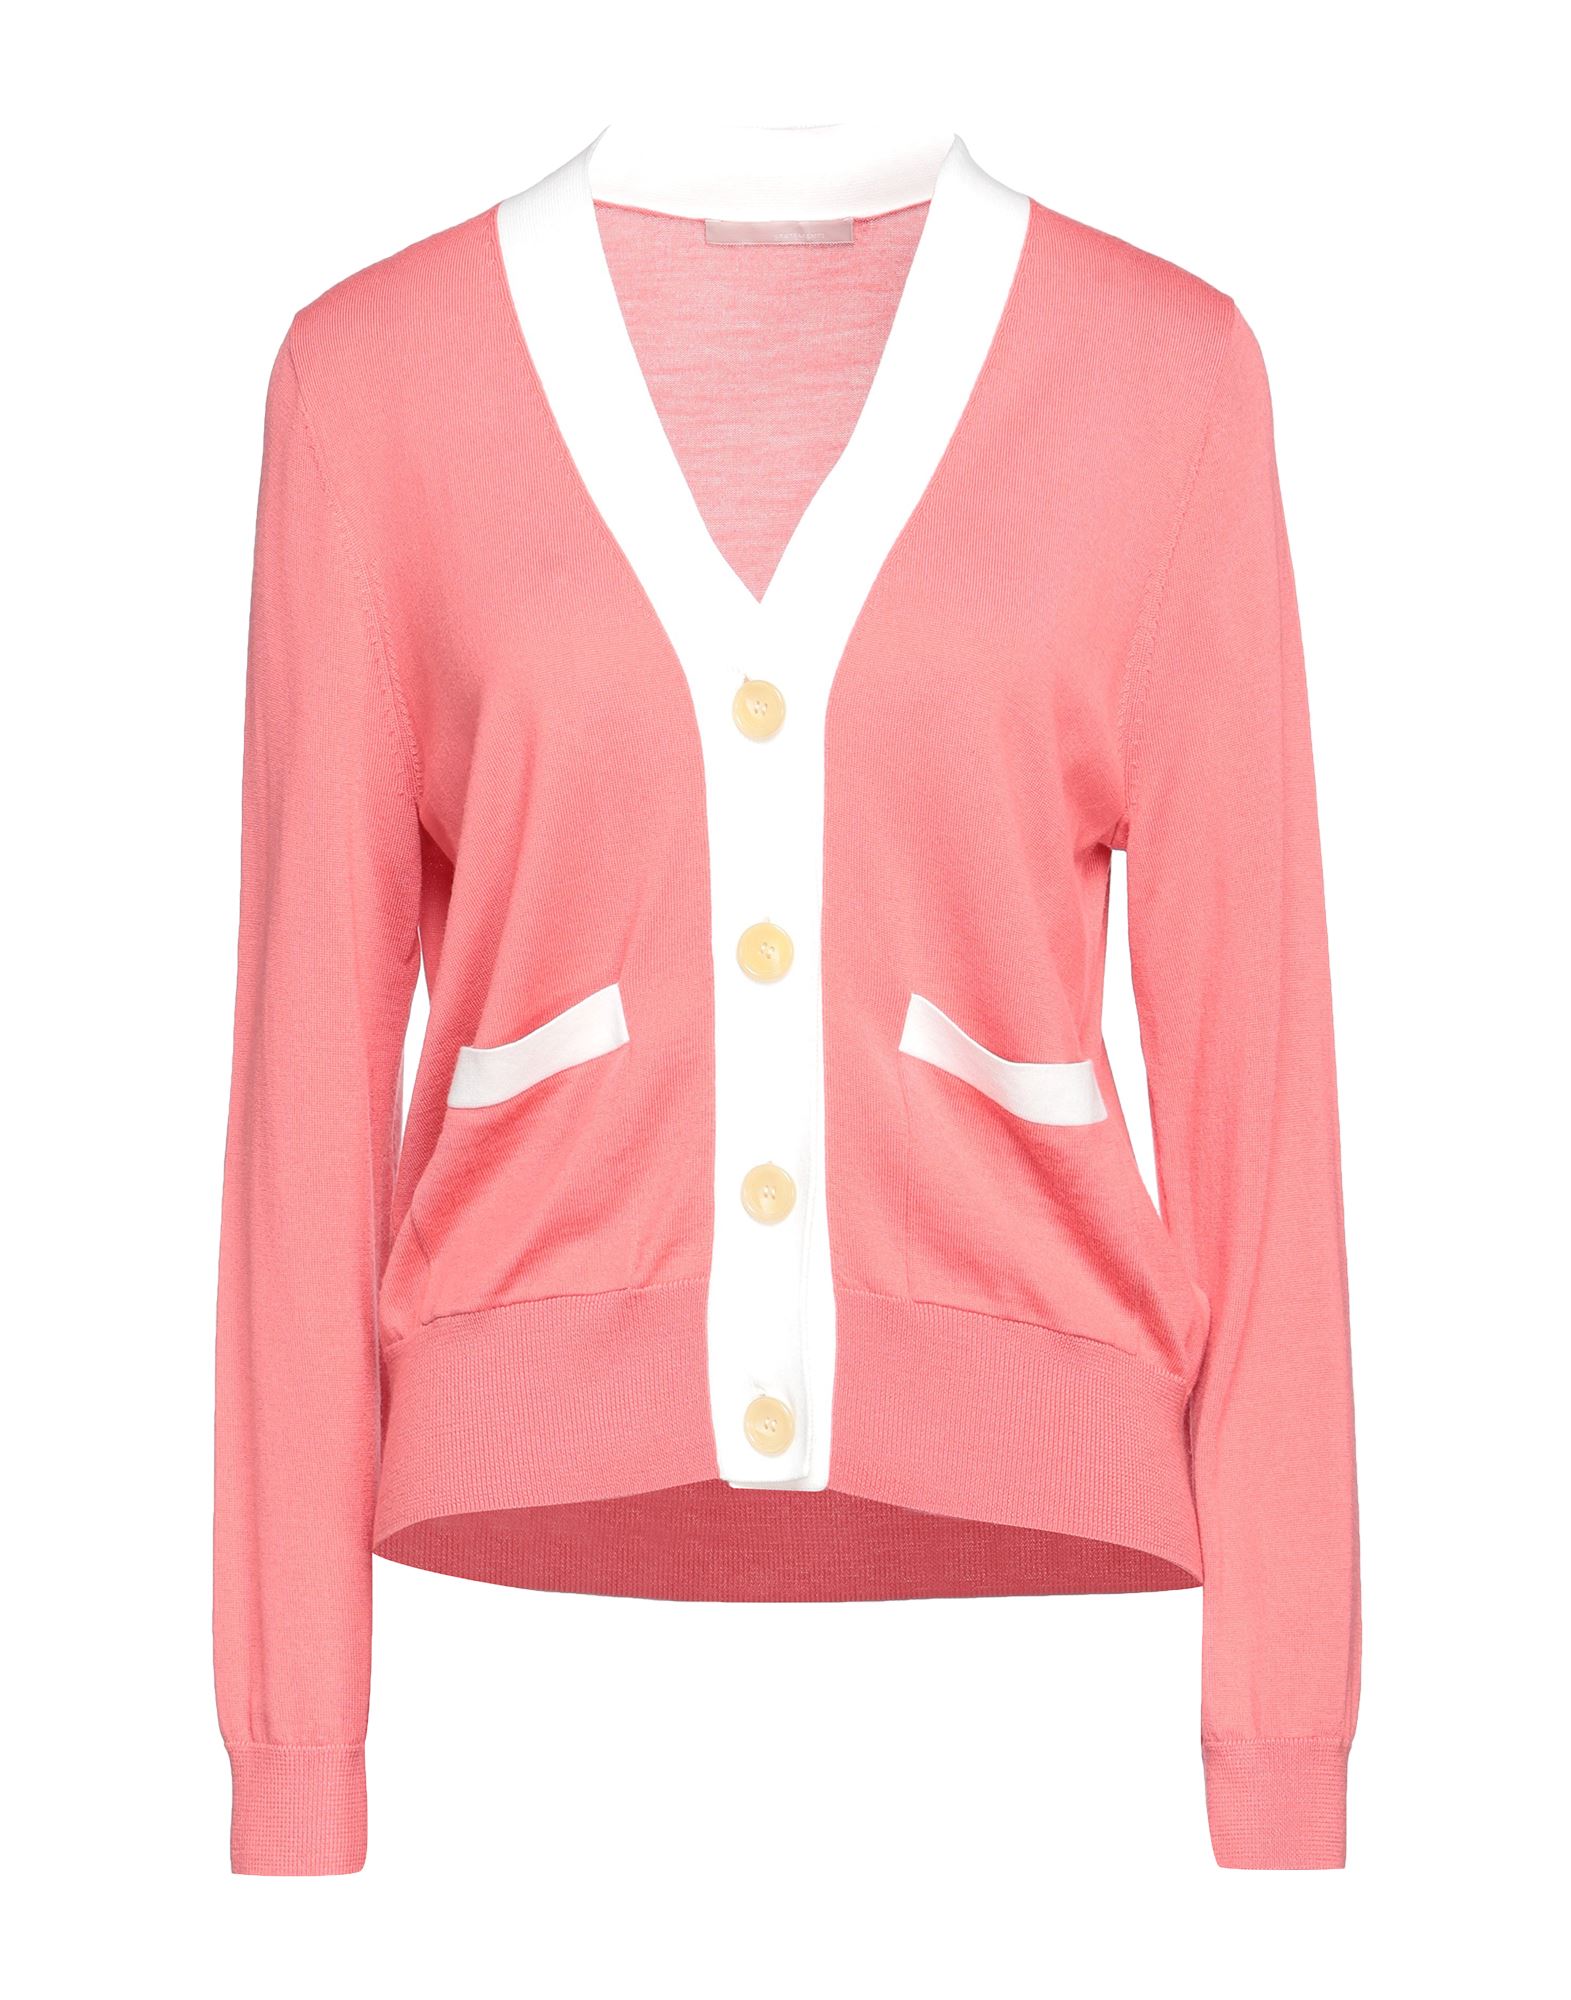 Statement Cardigans In Coral